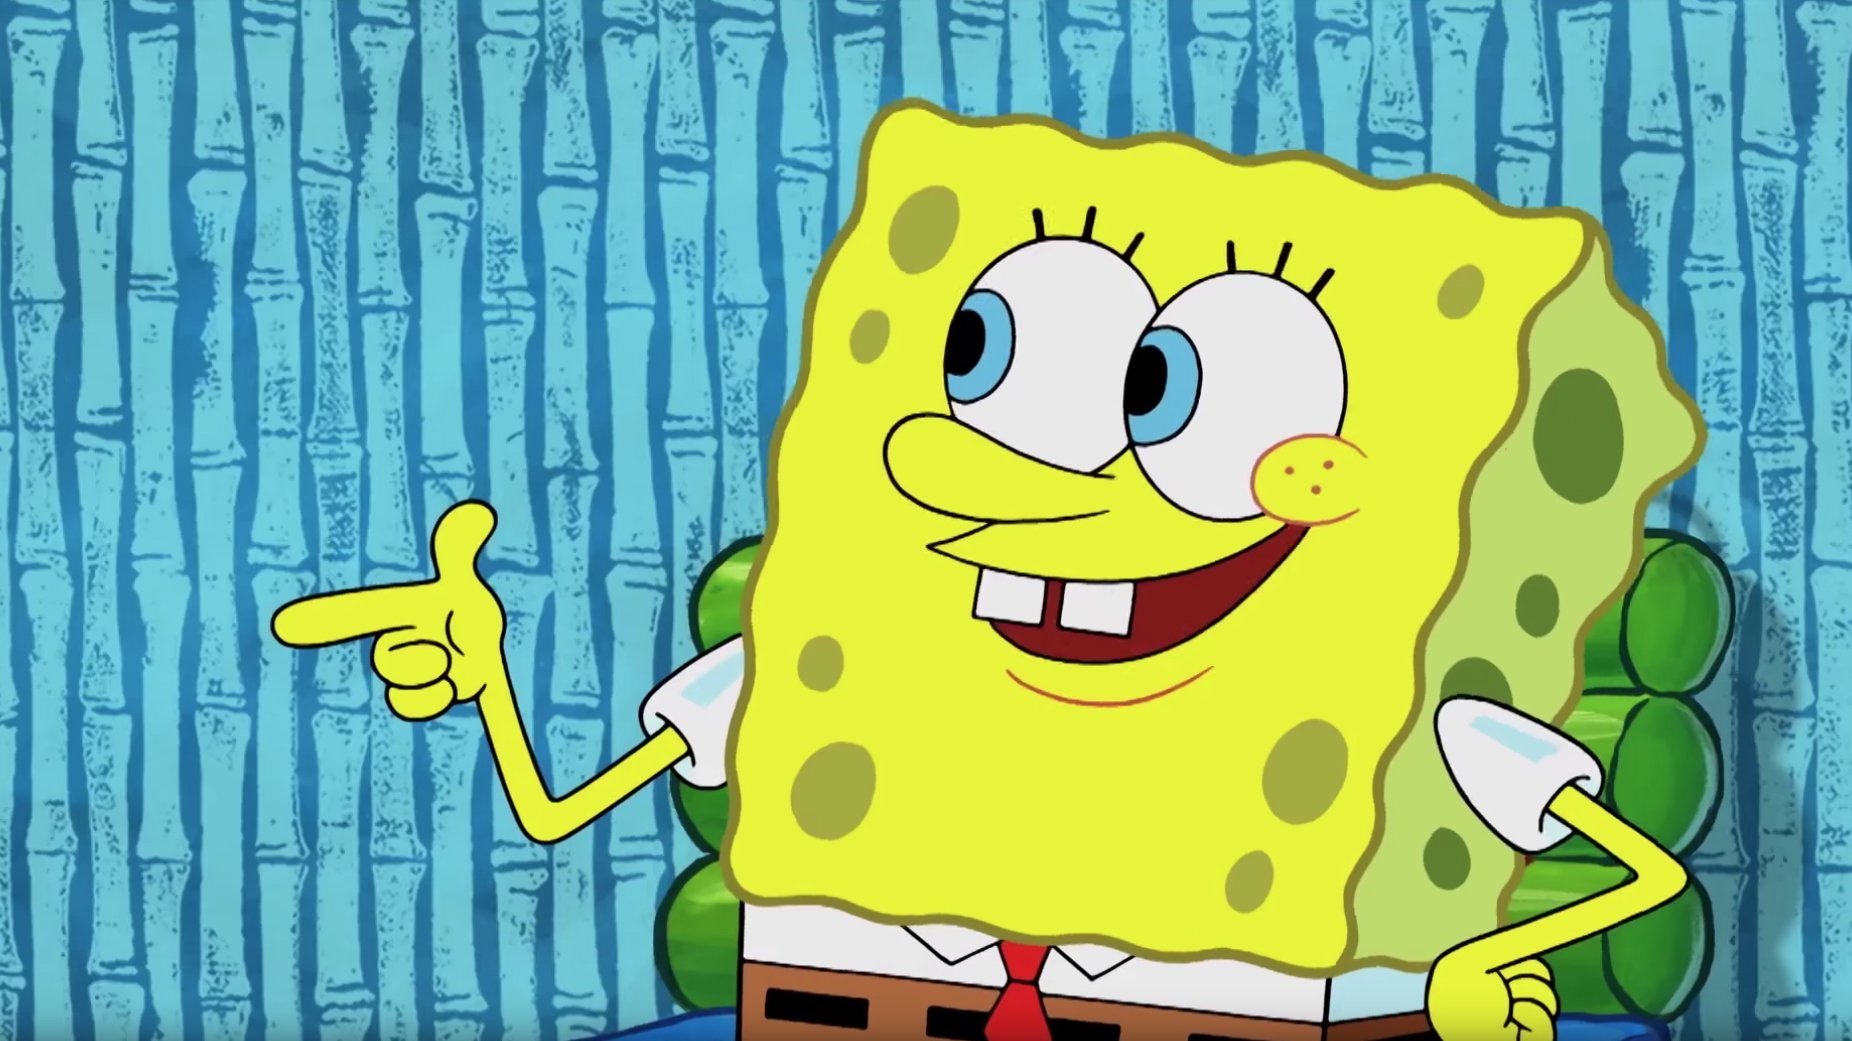 SpongeBob, slime, football: Nickelodeon ready for its NFL moment